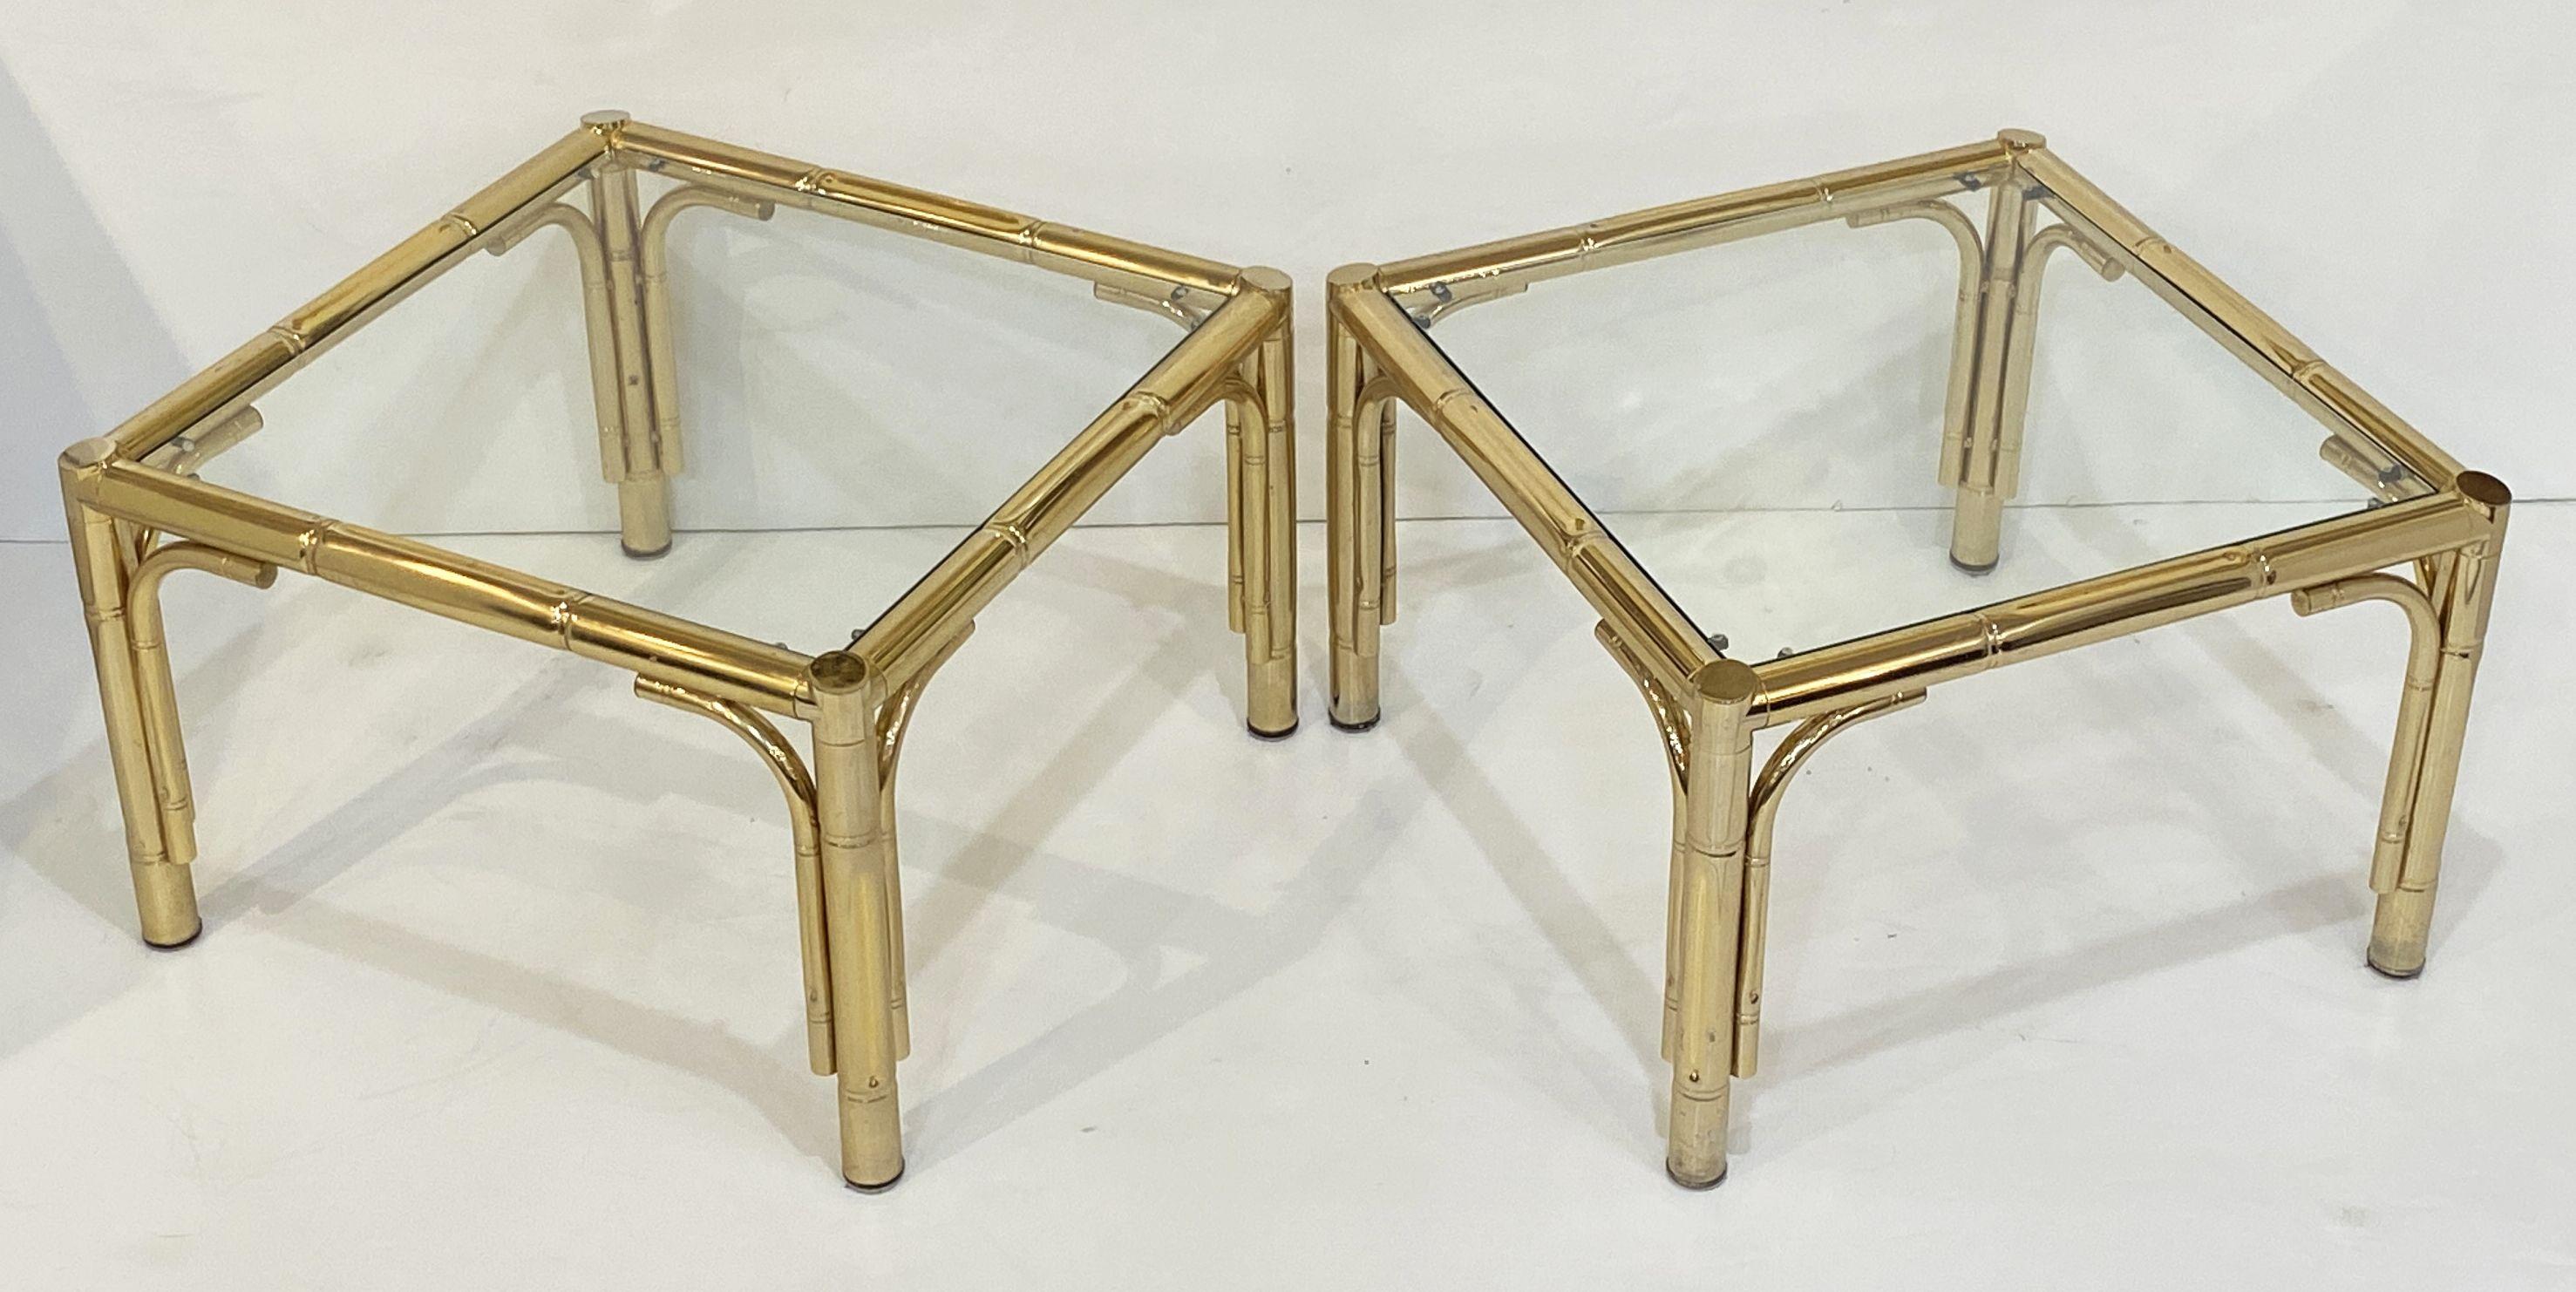 A fine pair of vintage French square low tables in brass with a handsome faux bamboo design to the frames - each table featuring an inset glass top over four legs.

Perfect for use as side or end tables or placed together as coffee of cocktail